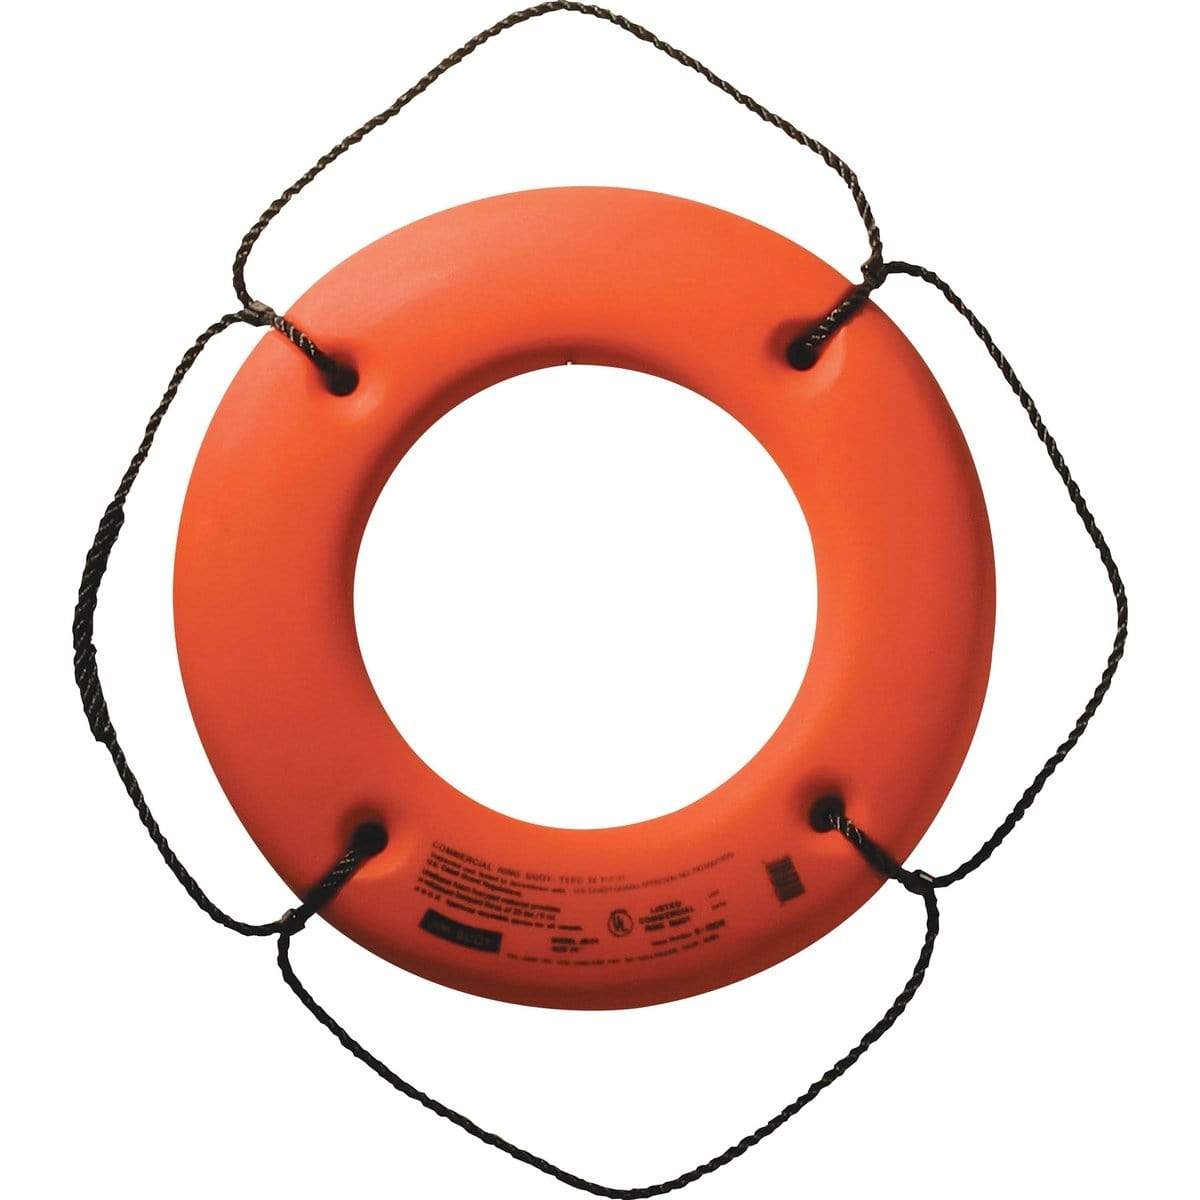 Cal-june Not Qualified for Free Shipping Cal-June USCG Approved Hard Shell Series Life Ring 20" Orange #HS-20 O